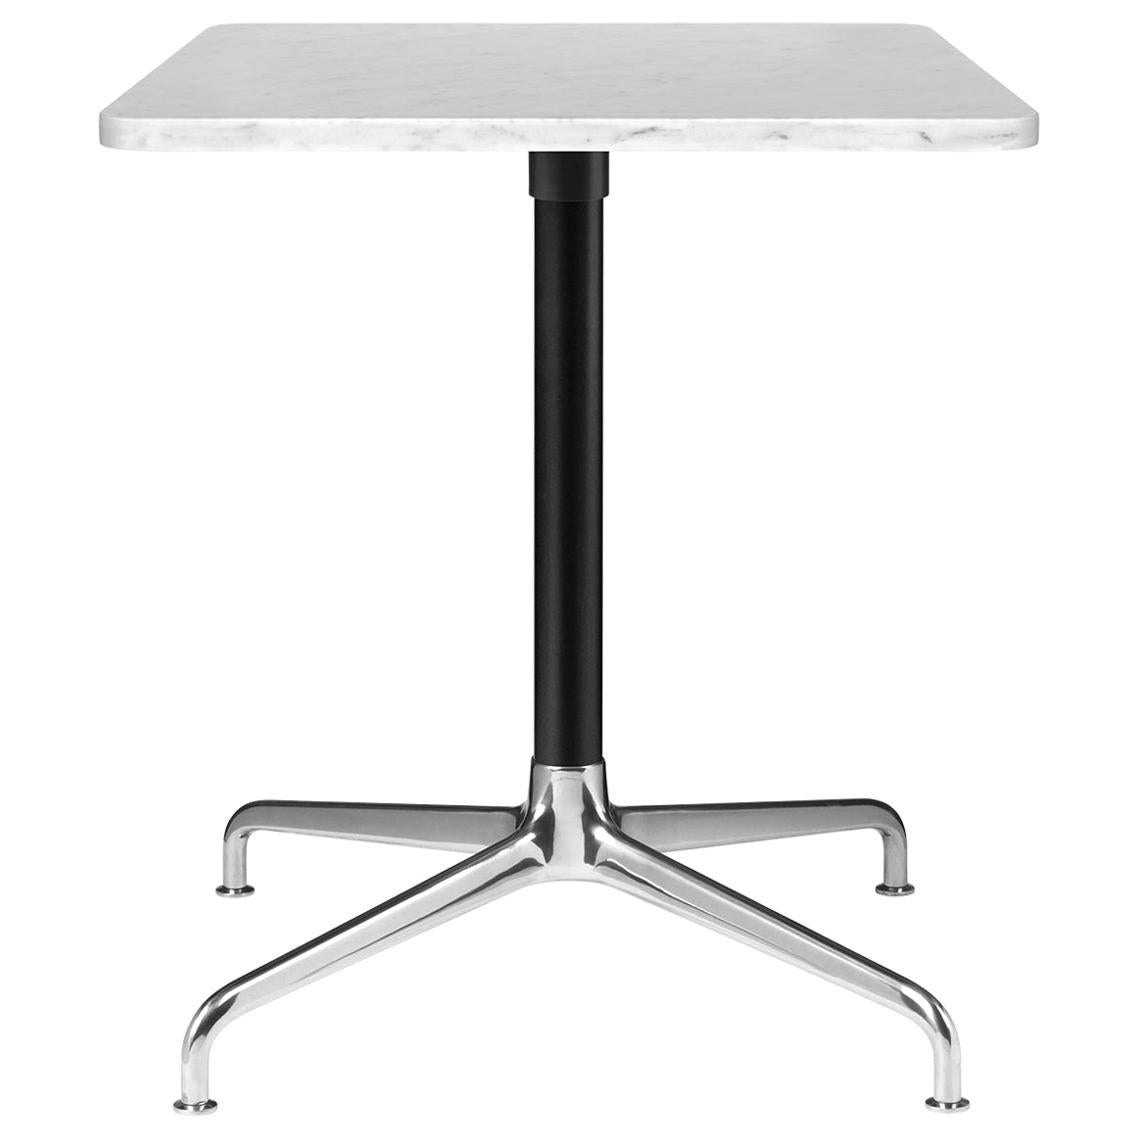 Beetle Lounge Table, Square, 4 Star Base, Medium, Marble For Sale